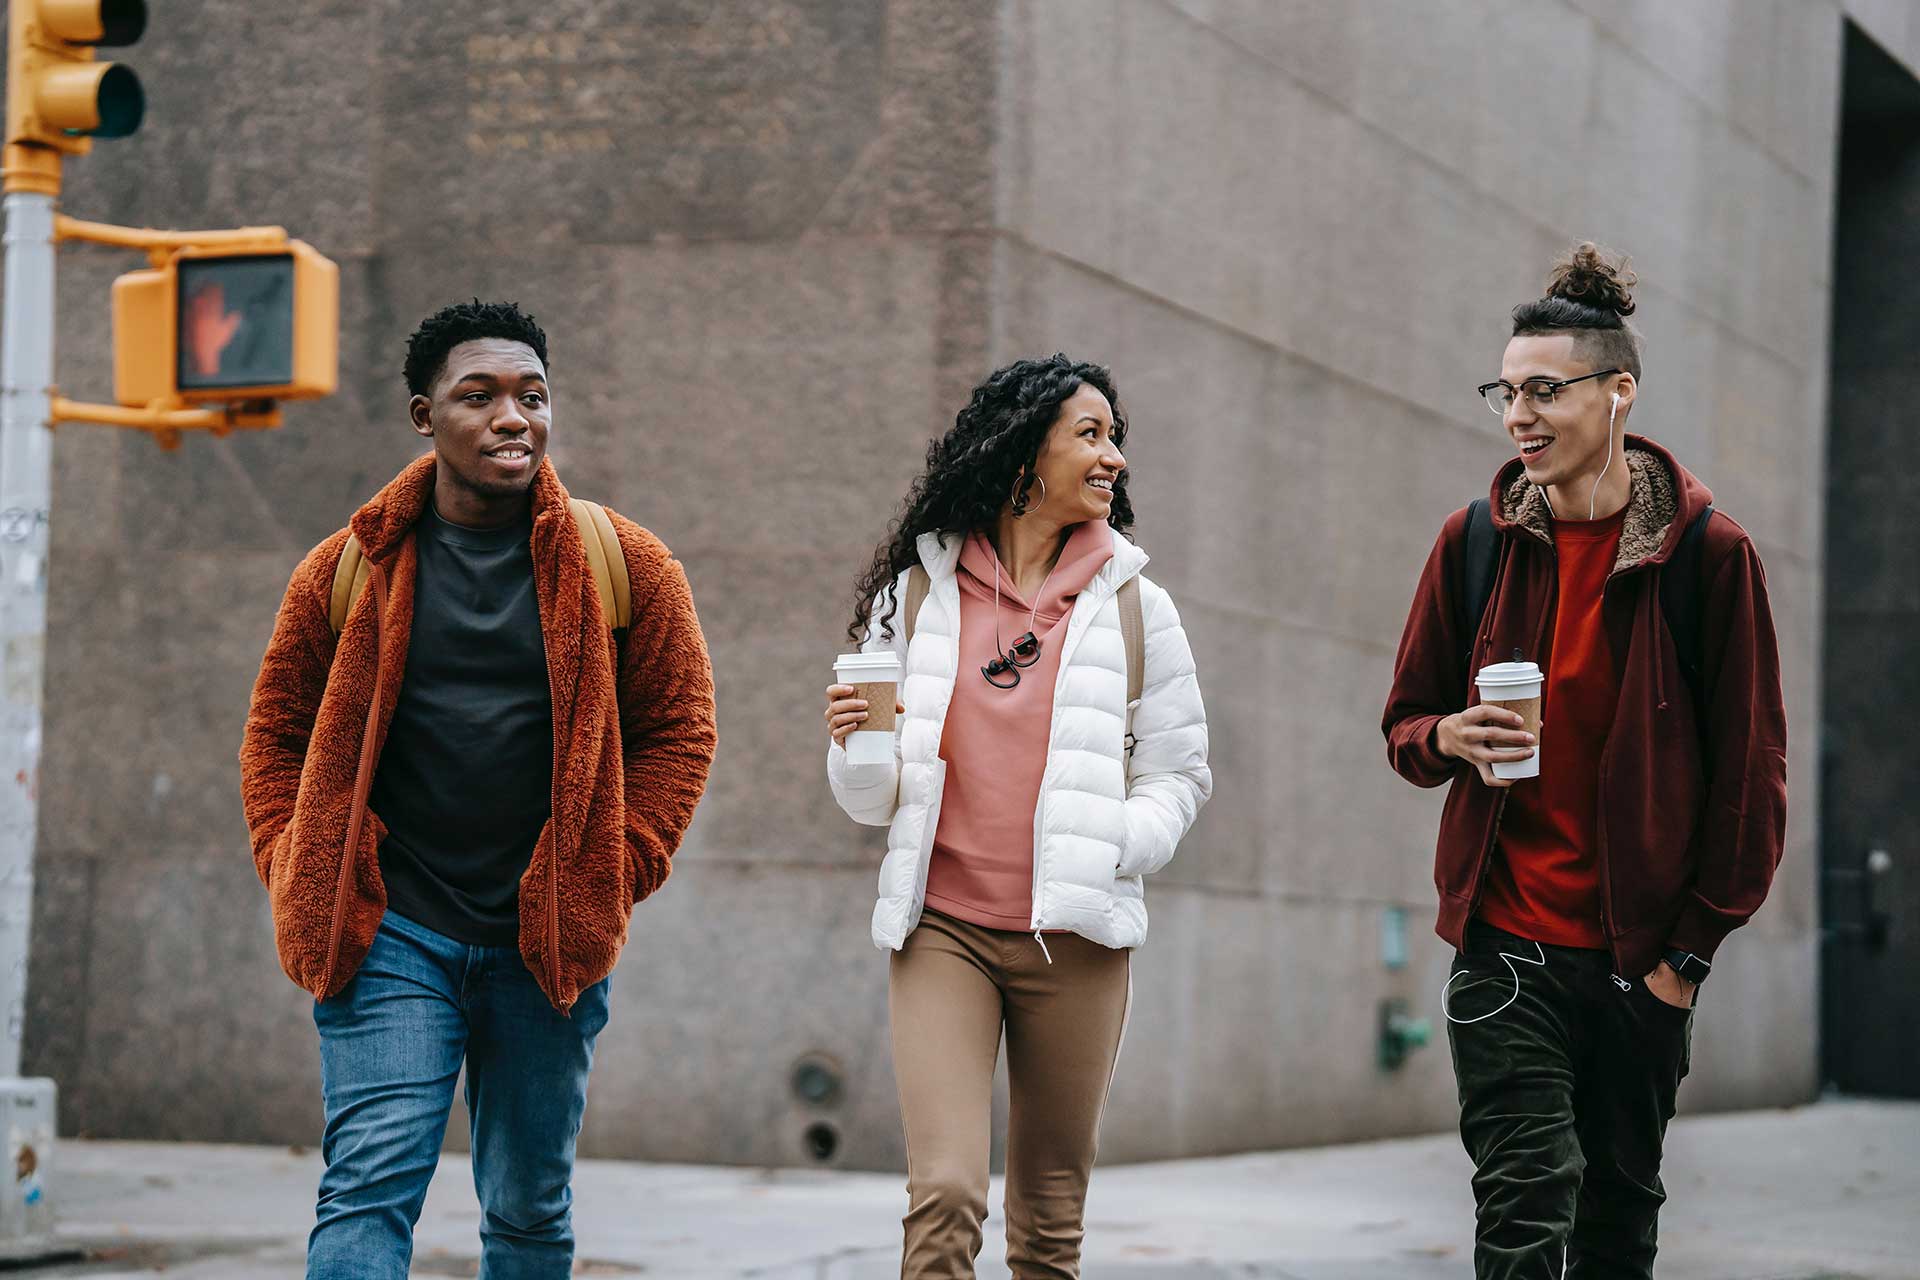 Three young people walk together on what looks like a city street, dressed warmly and smiling at each other.